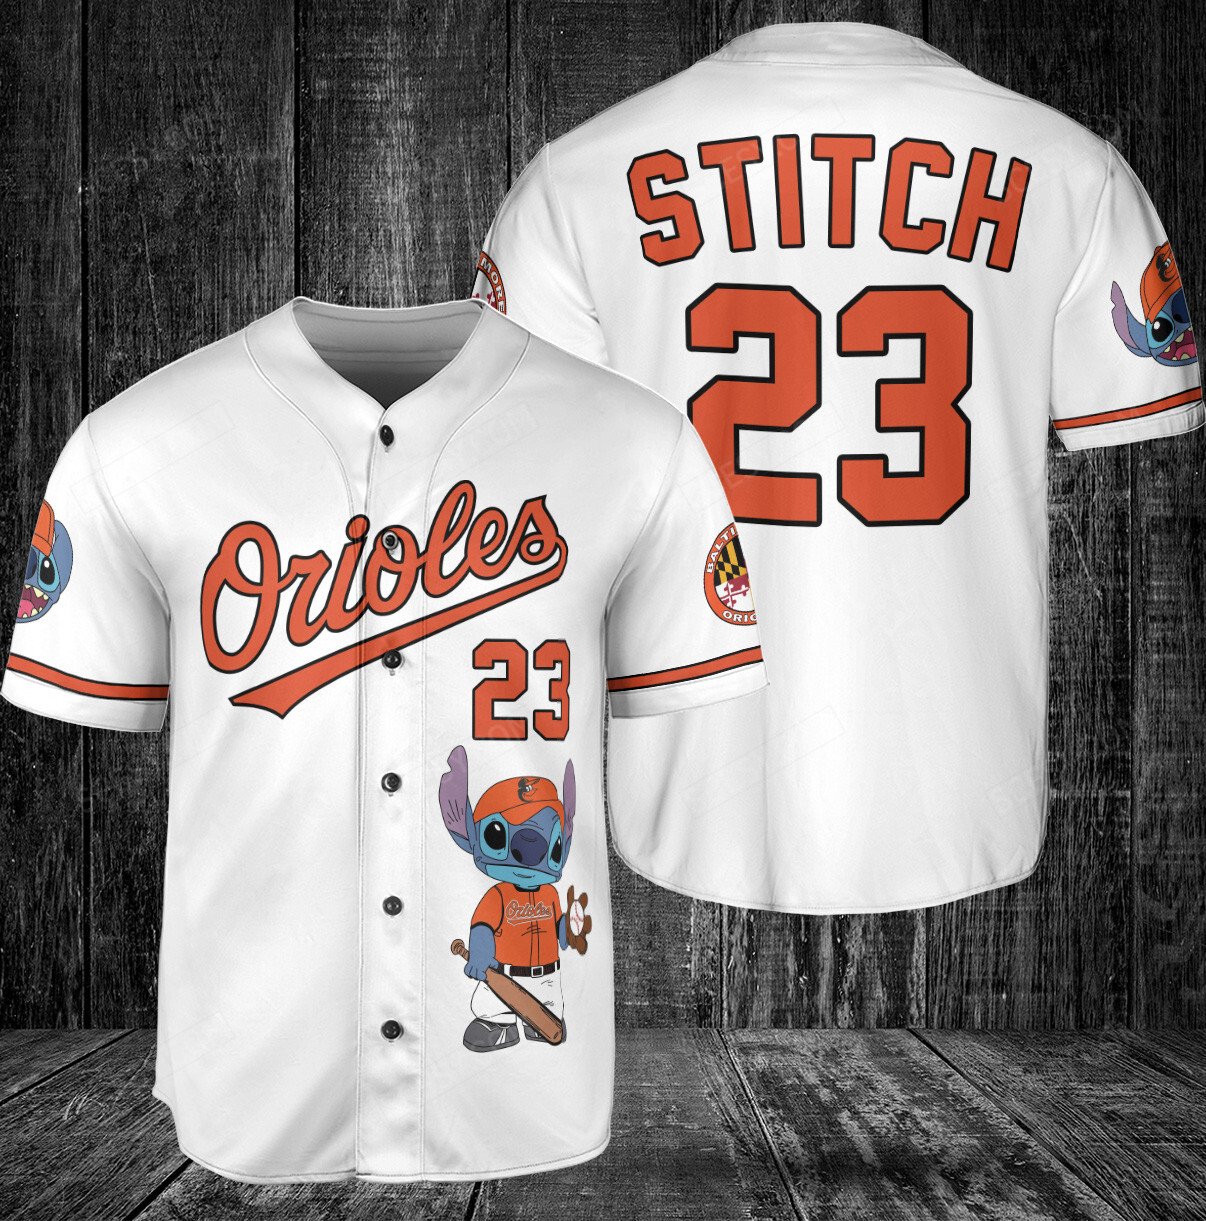 Baltimore Orioles Nike City Connect Jerseys in MLB The Show 23 